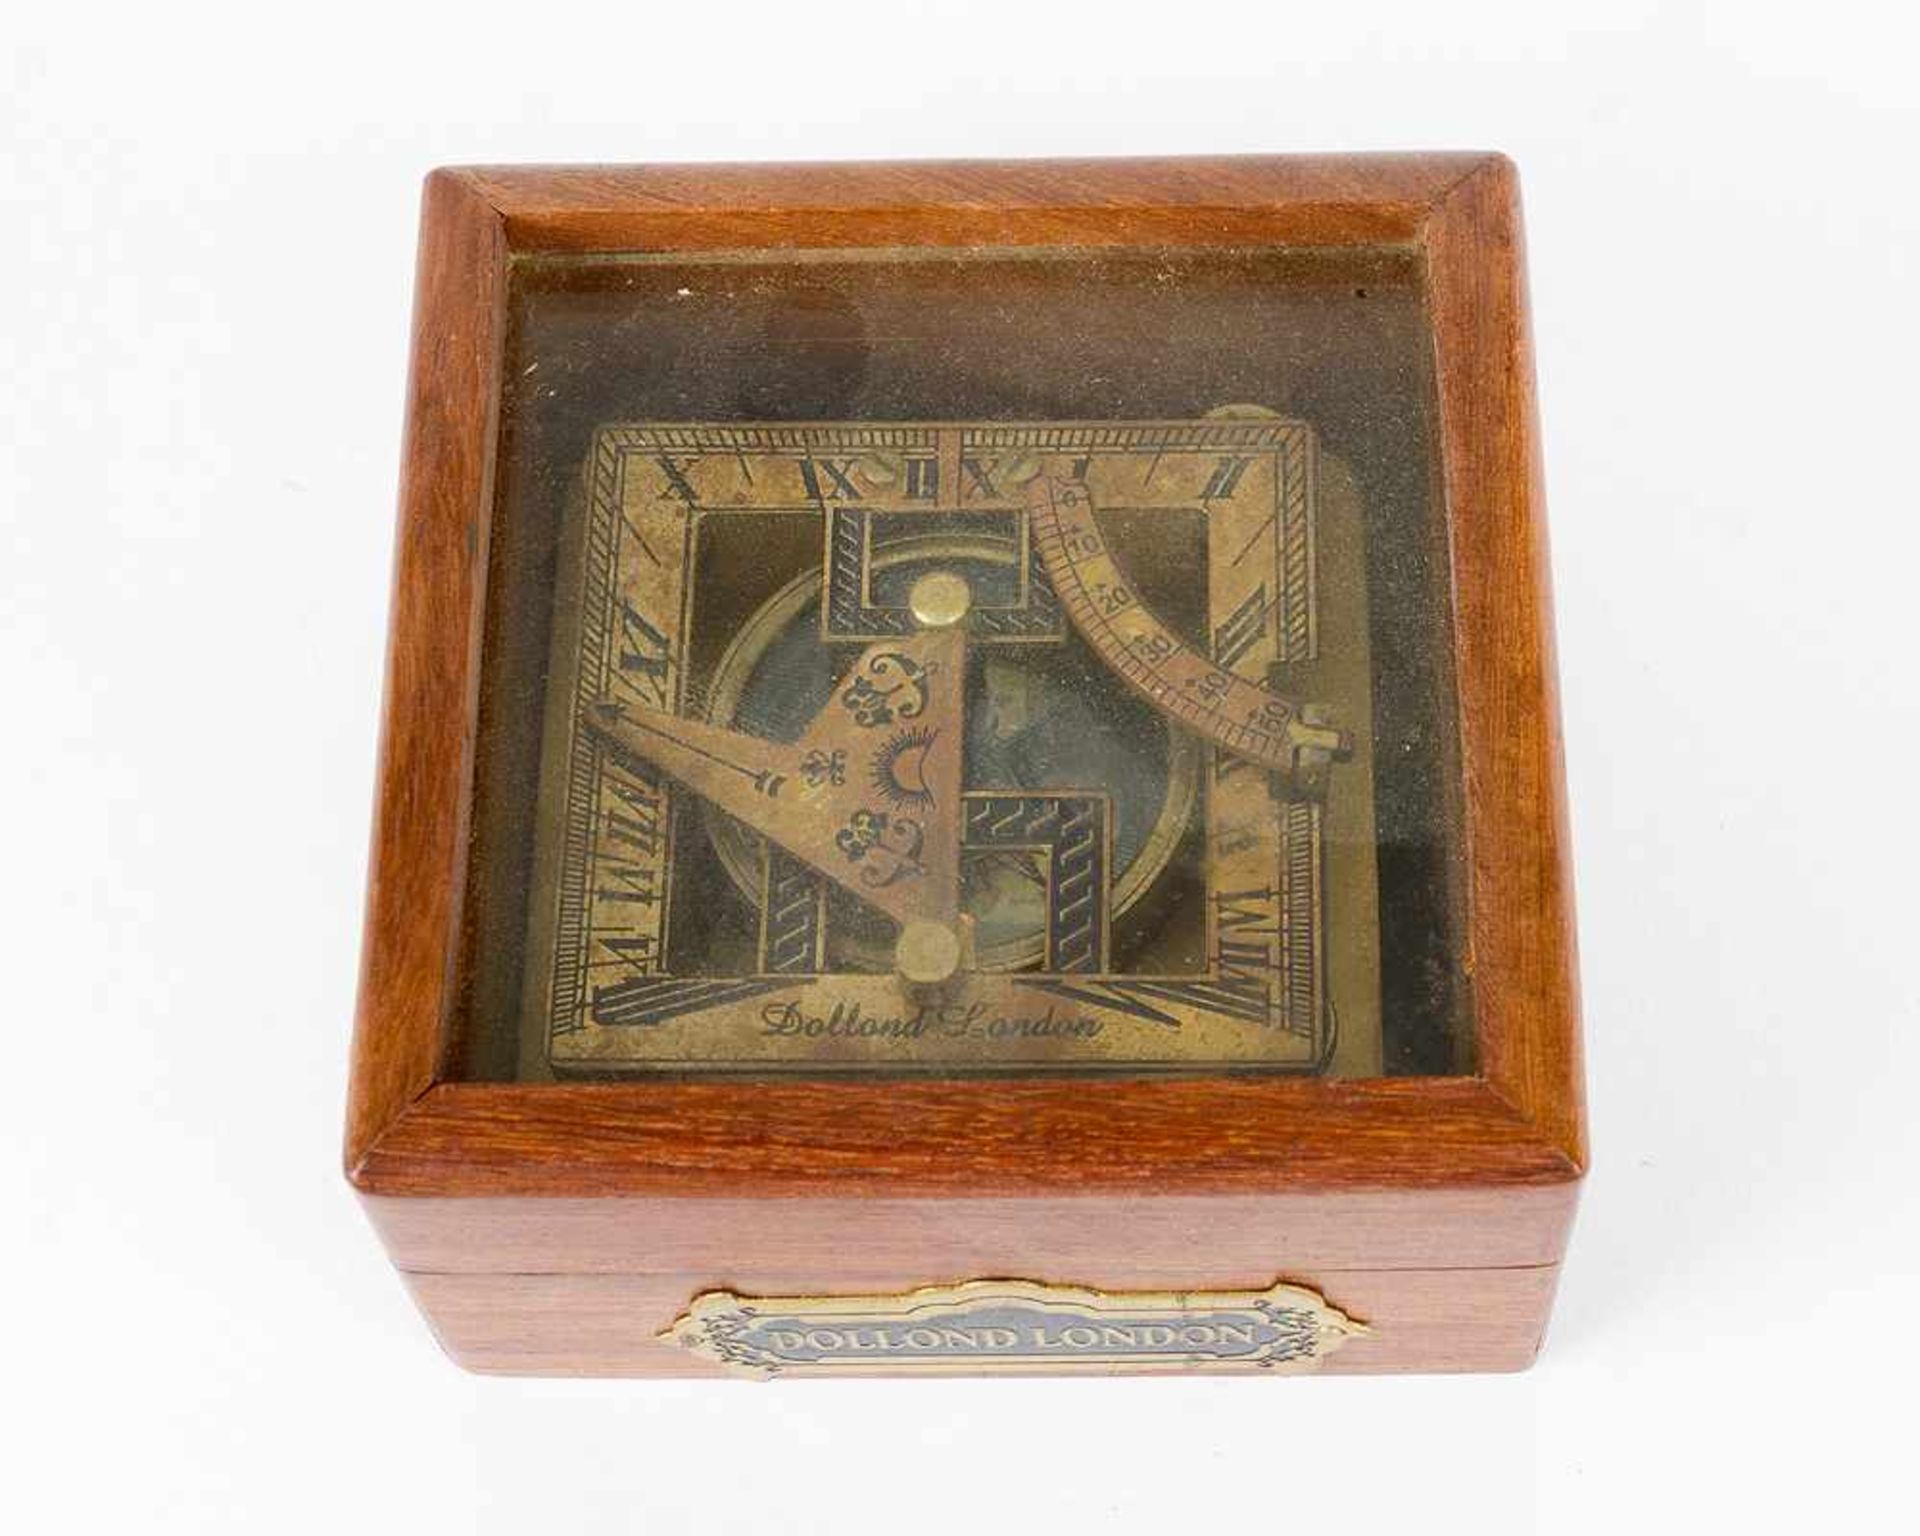 Dollond Sundial with compass, bronze with scales in wooden glazed box.